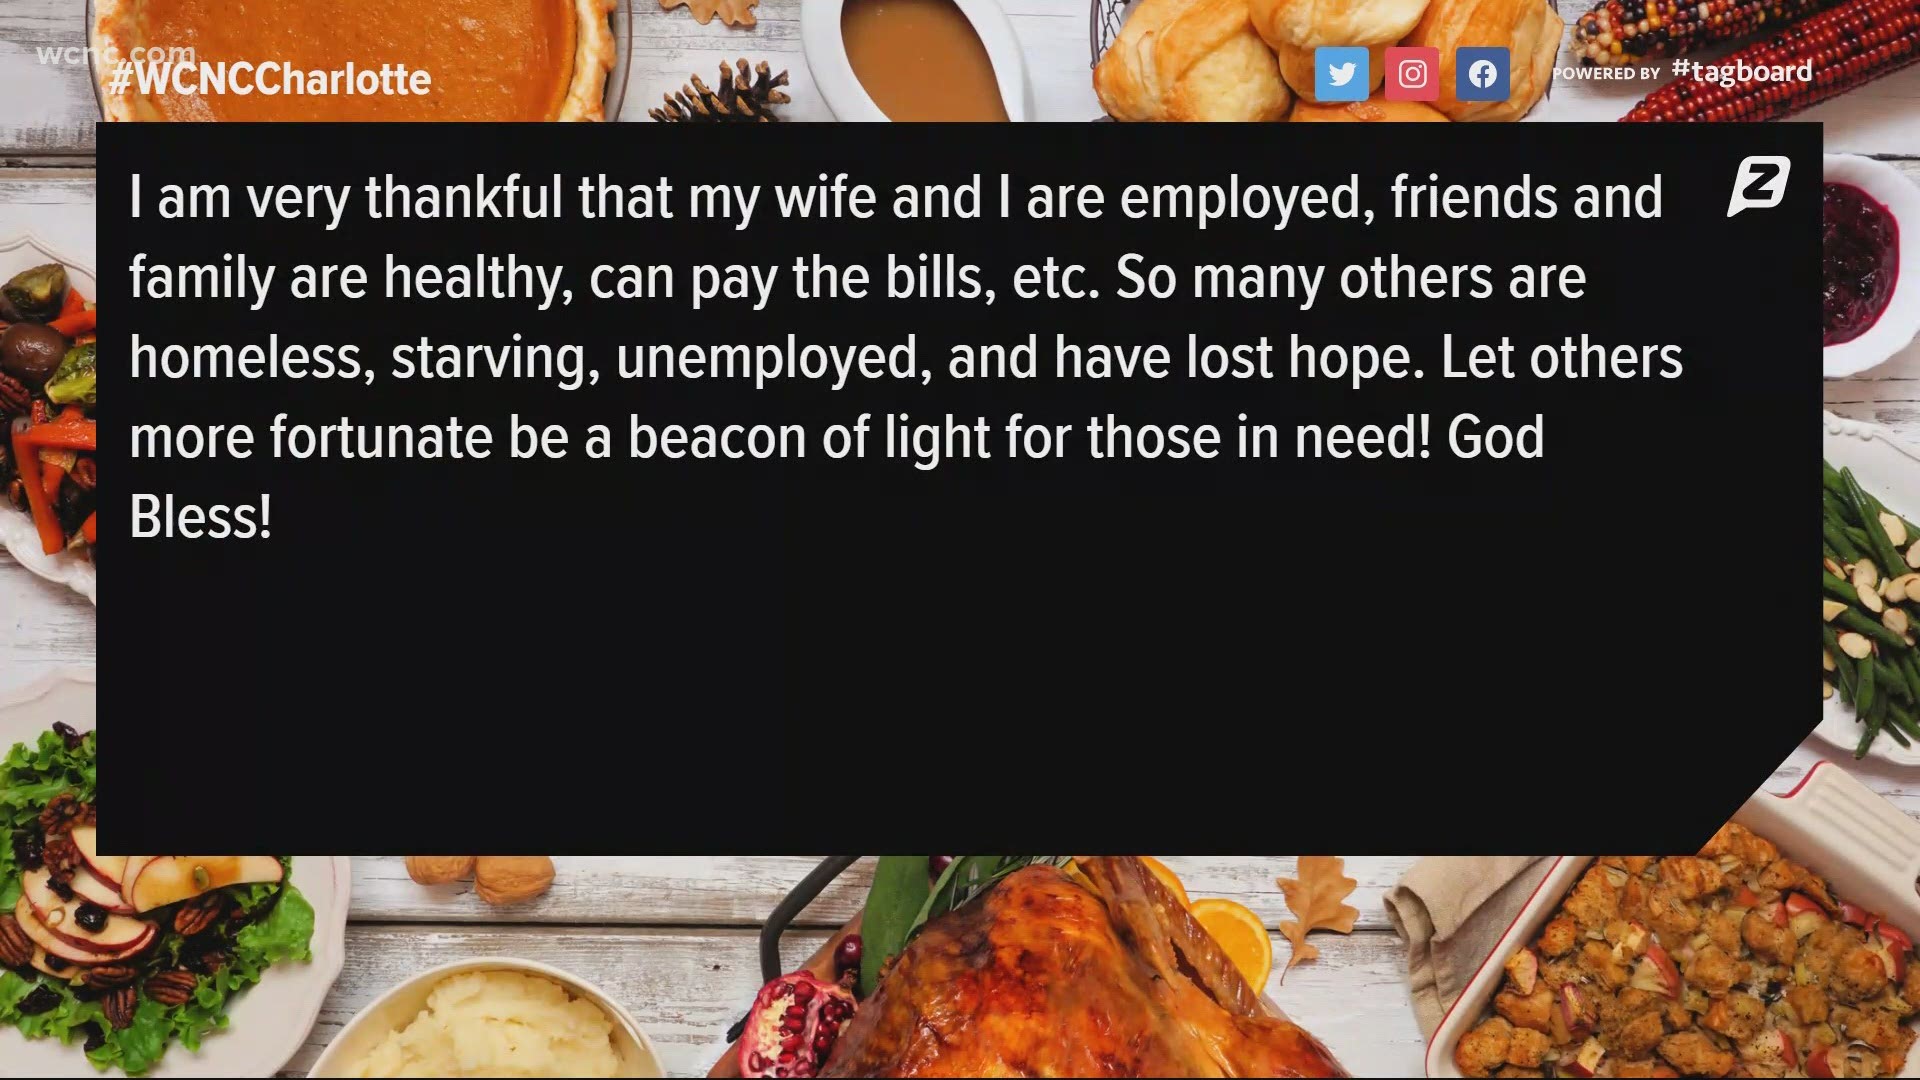 One person said they are thankful to work from home so they can spend quality time with their family.